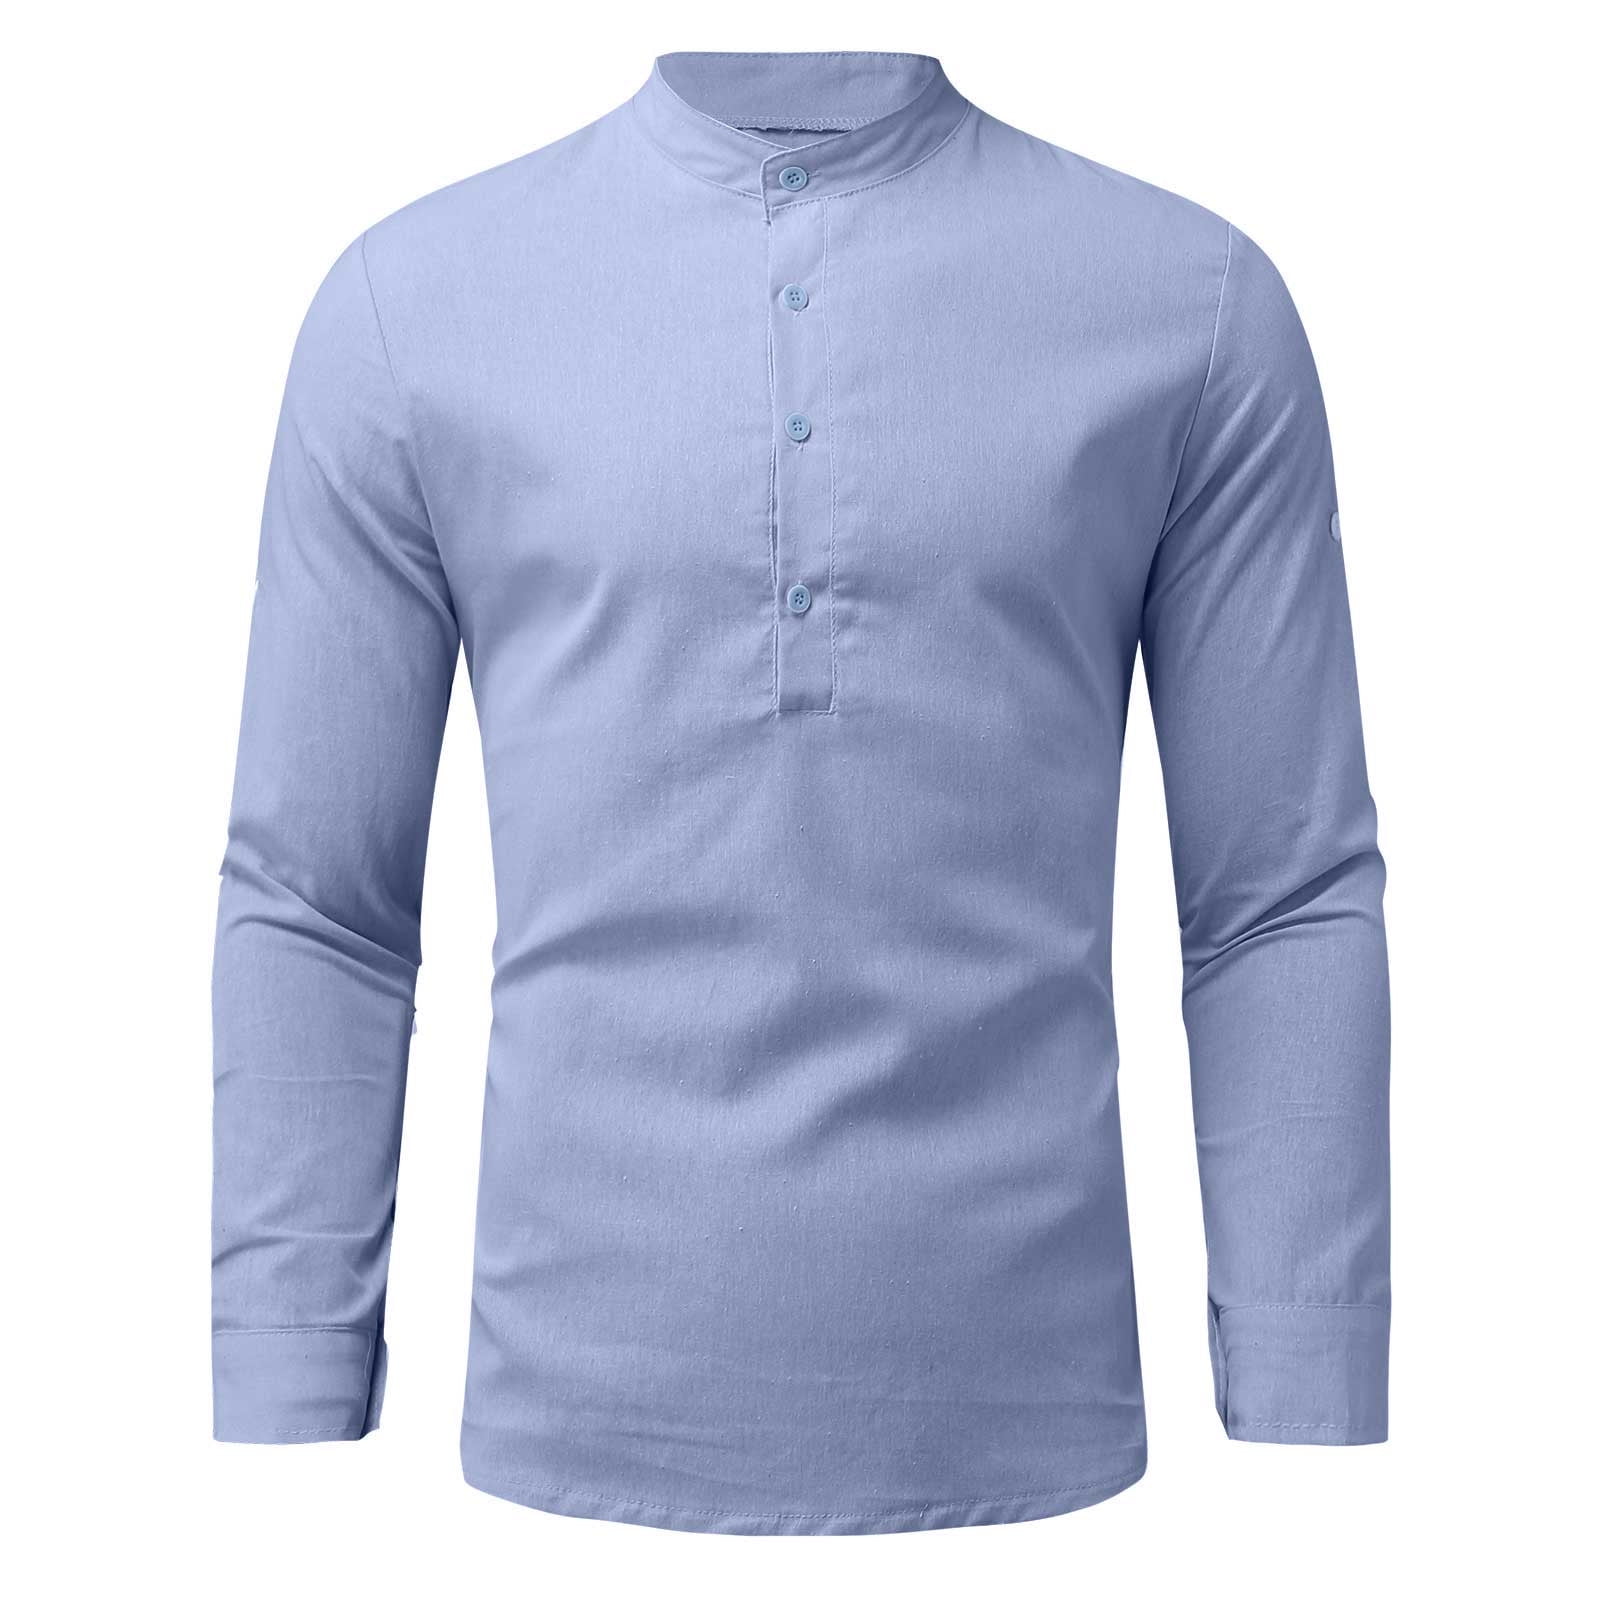 cllios Men's Casual Henley Shirts Collarless Linen Cotton Beach Yoga Shirts  Hippie Long Sleeve Tops Loose Fit 